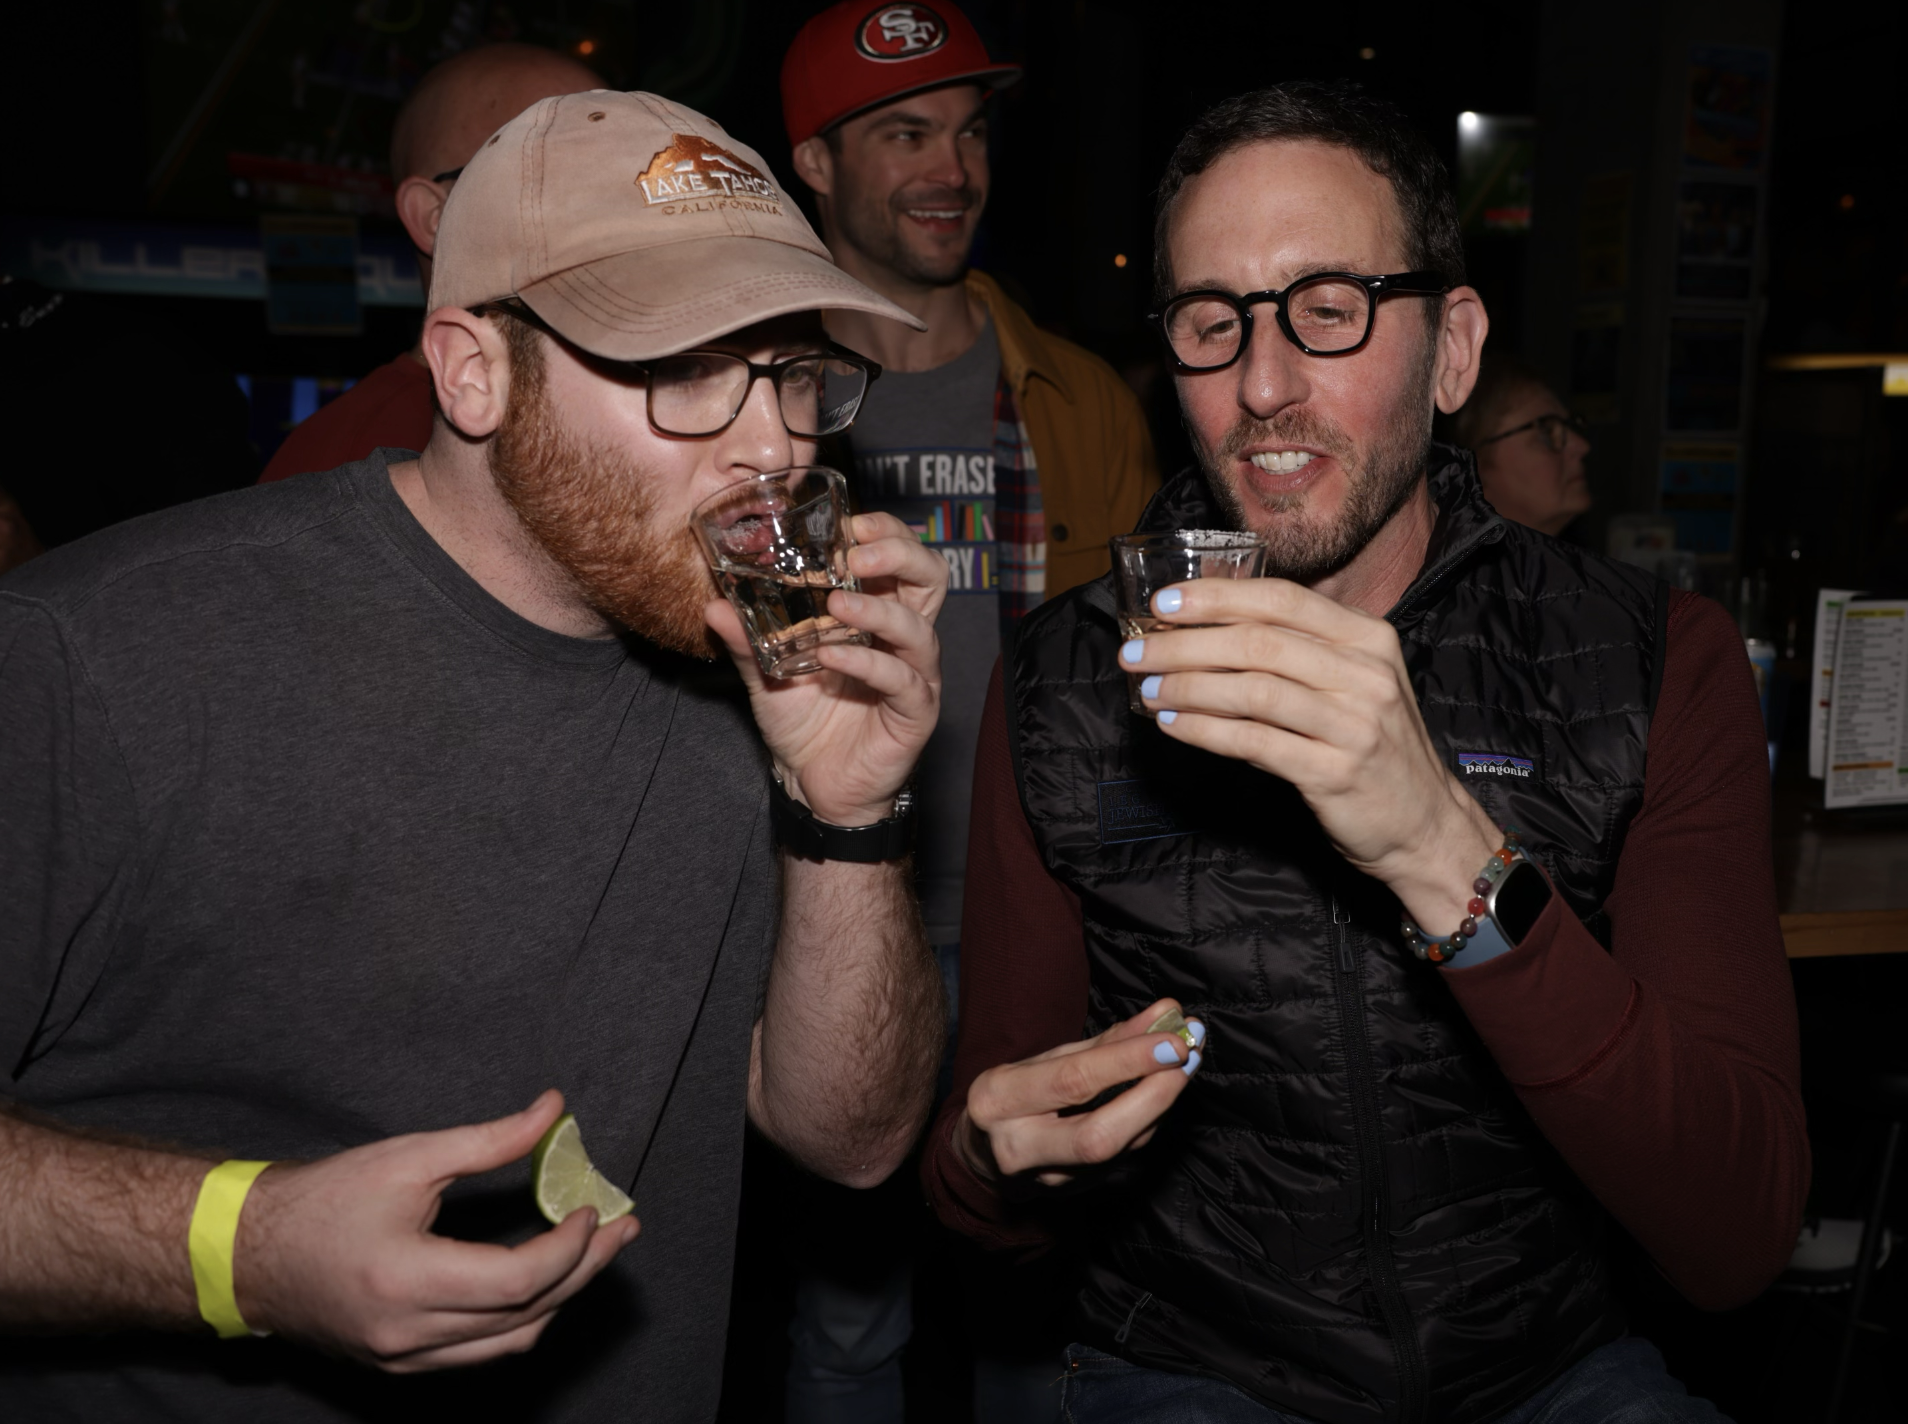 Two men are taking a shot at a bar; one is holding a lime wedge, both are wearing casual attire.